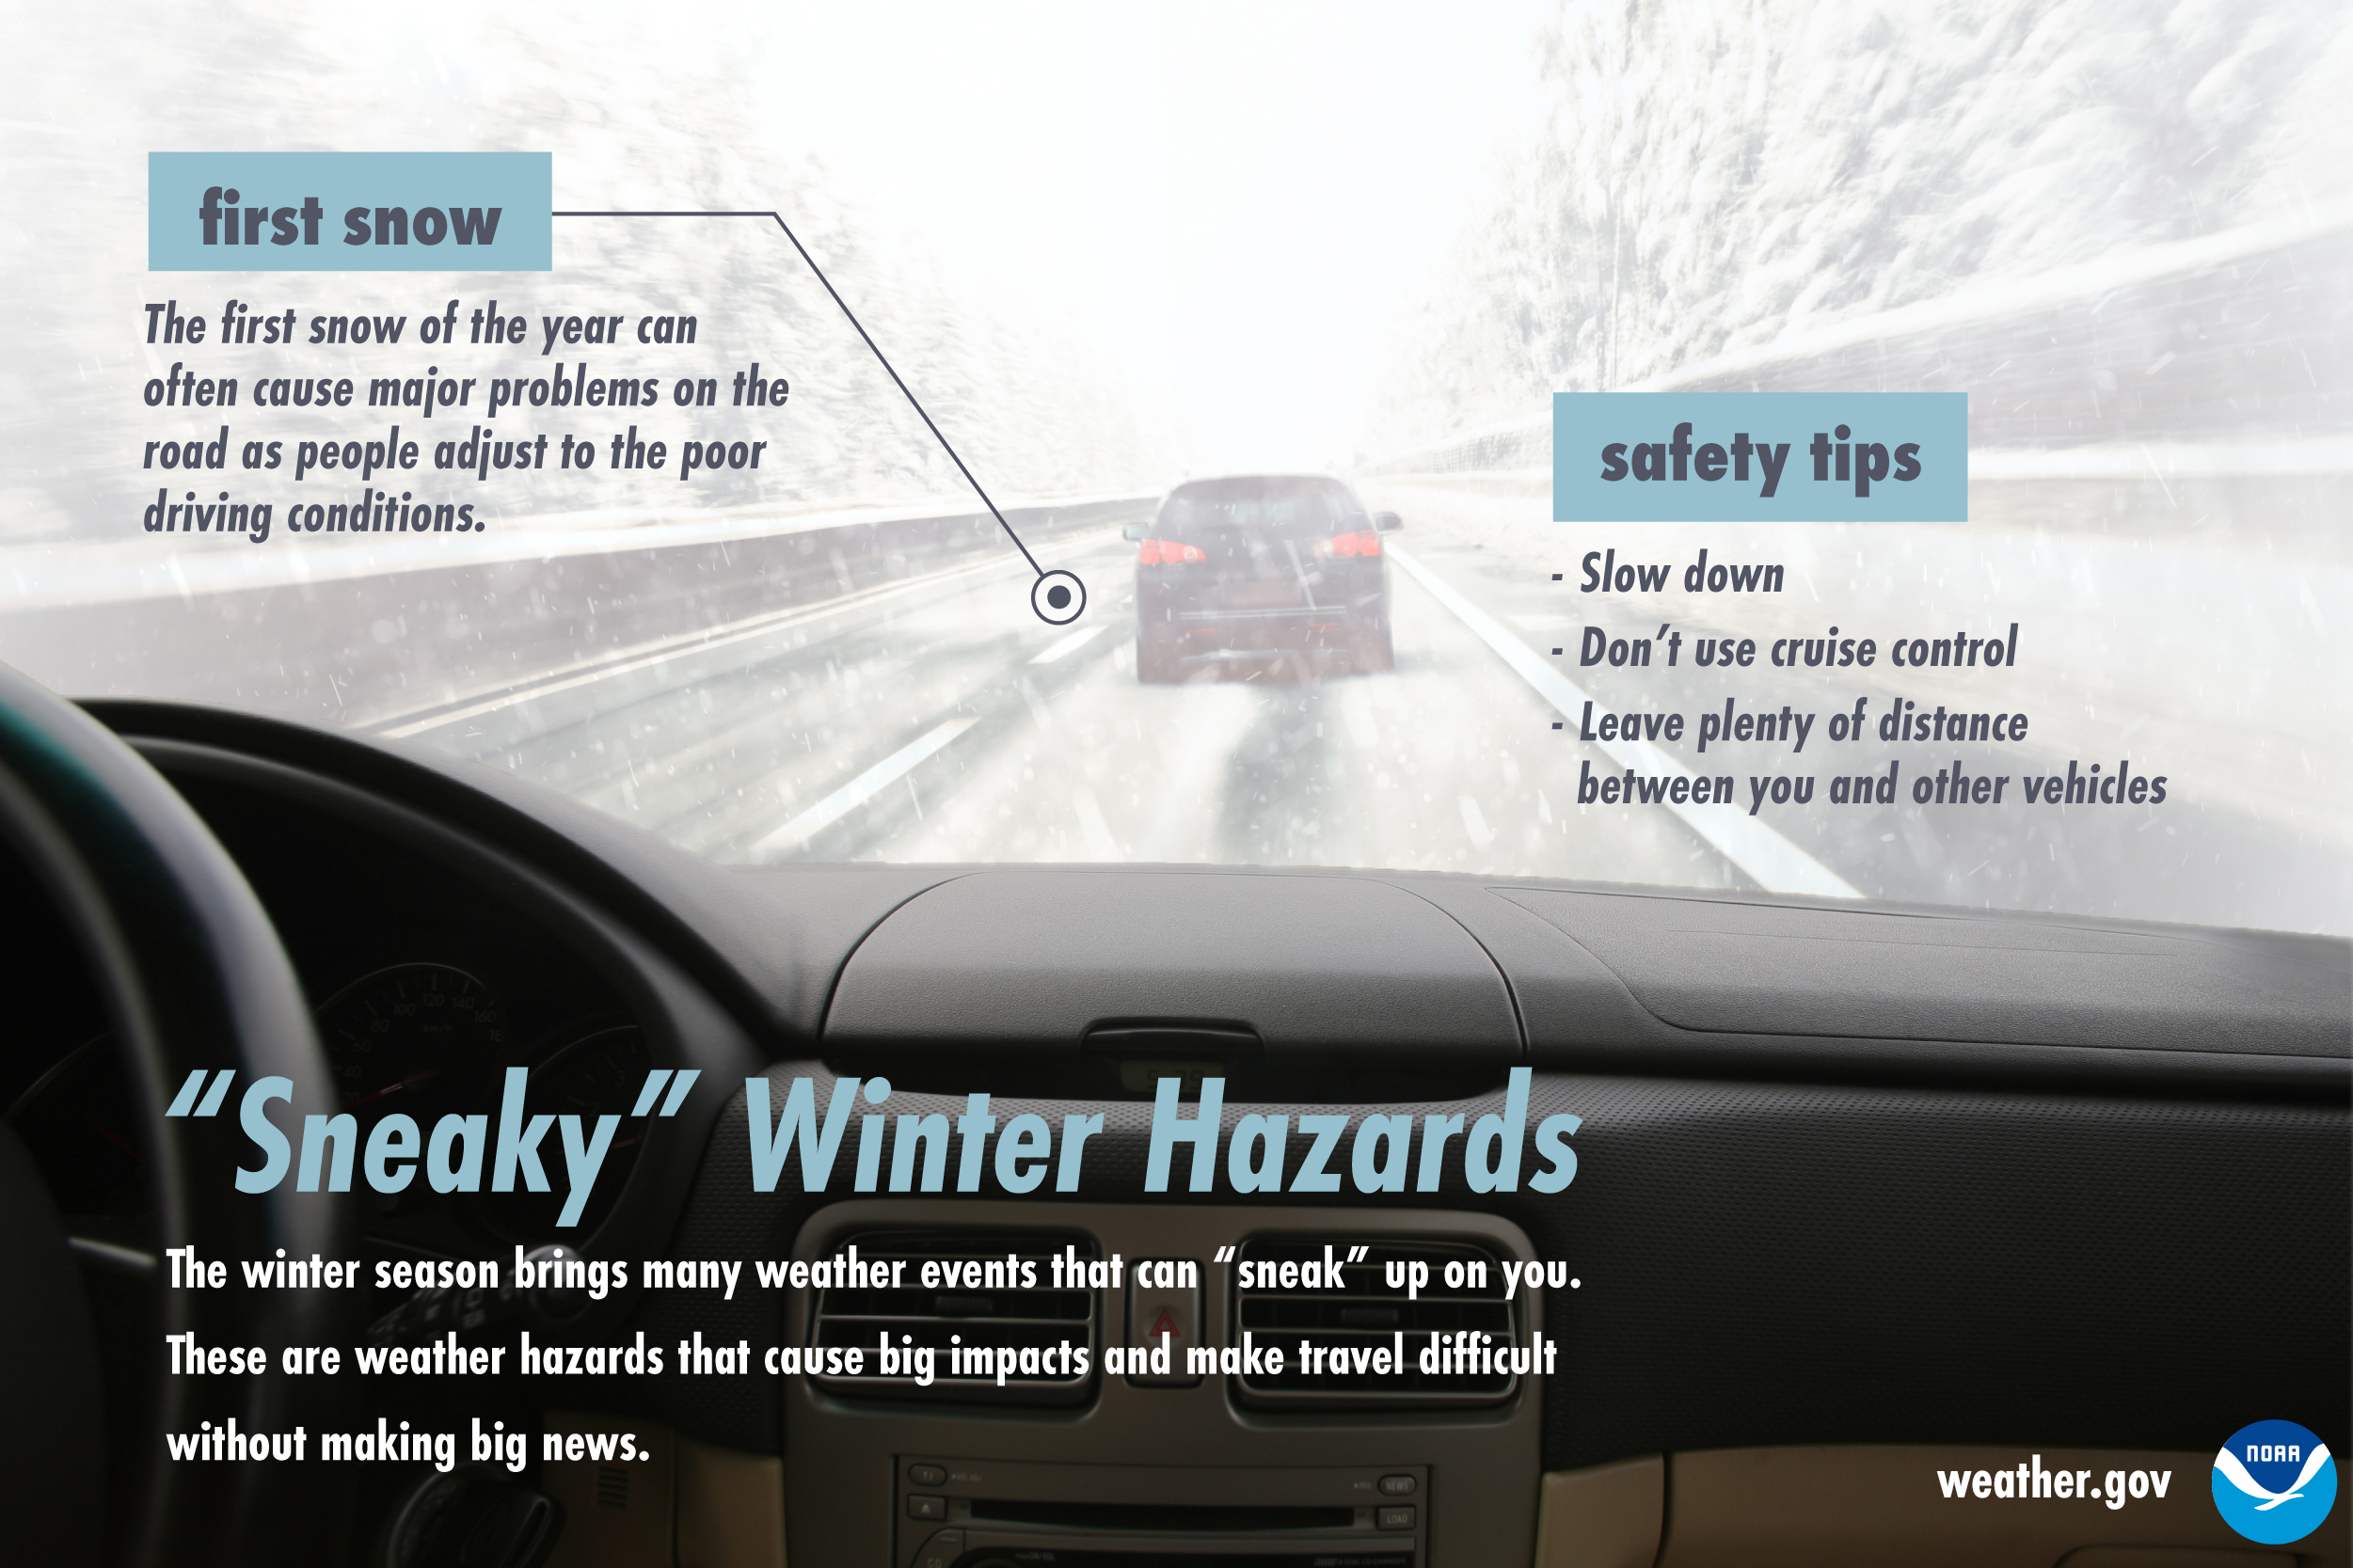 Sneaky Winter Hazards: First snow. The first snow of the year can often cause major problems on the road as people adjust to the poor driving conditions. Safety tips: slow down; don't use cruise control; leave plenty of distance between you and other vehicles.